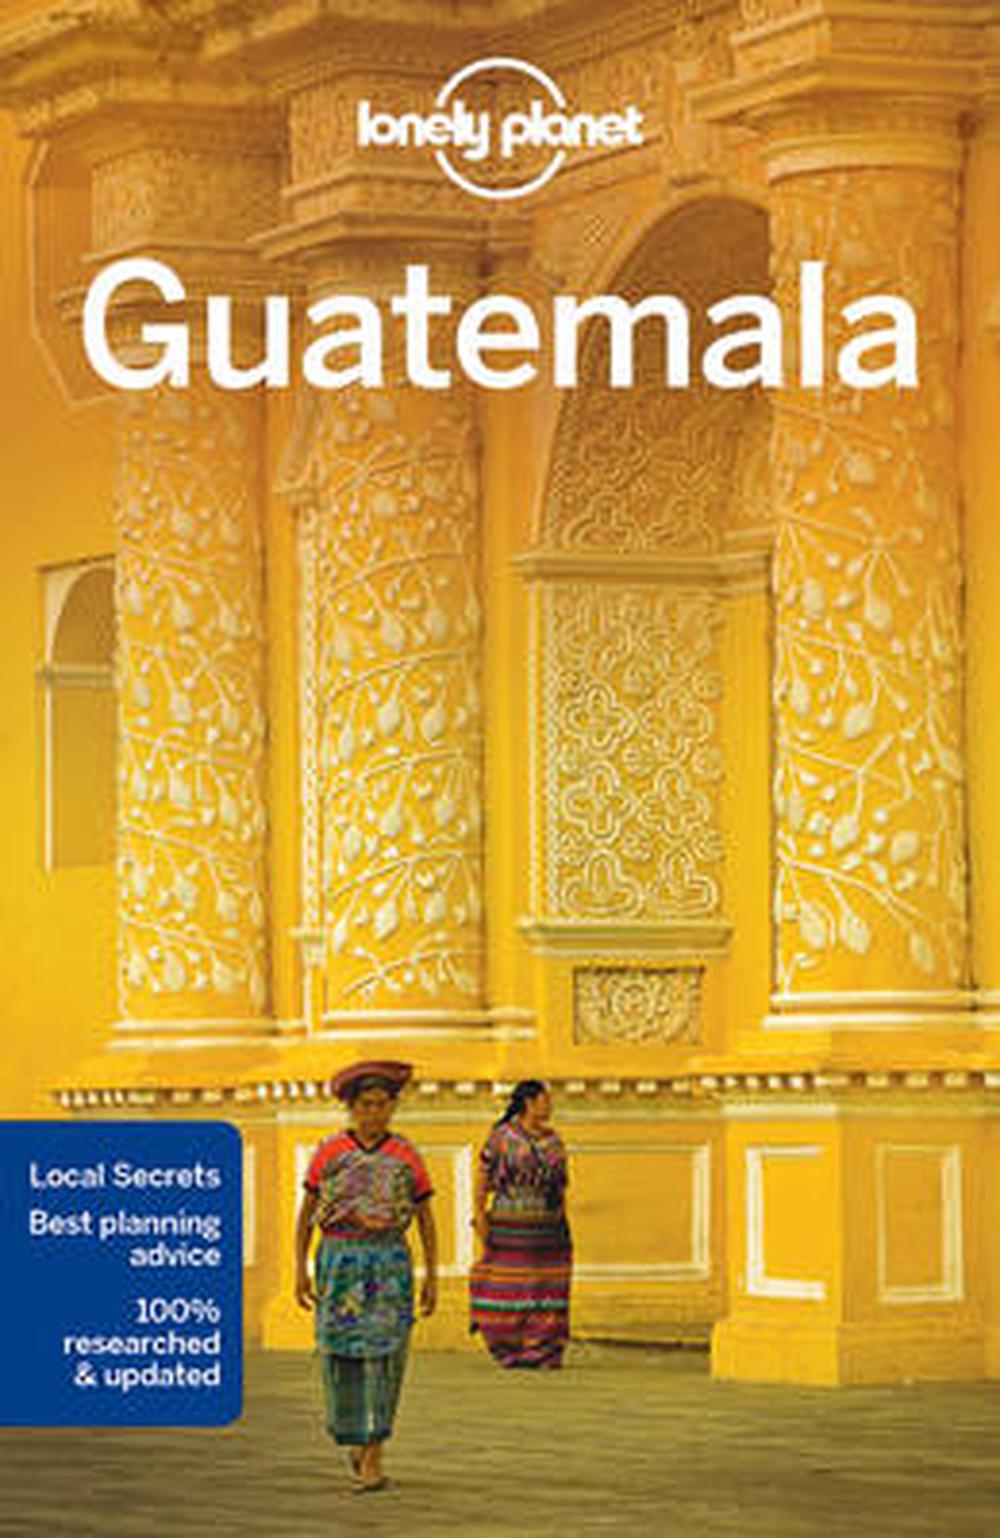 Lonely Planet Guatemala By Lonely Planet Paperback 9781786571144 2916